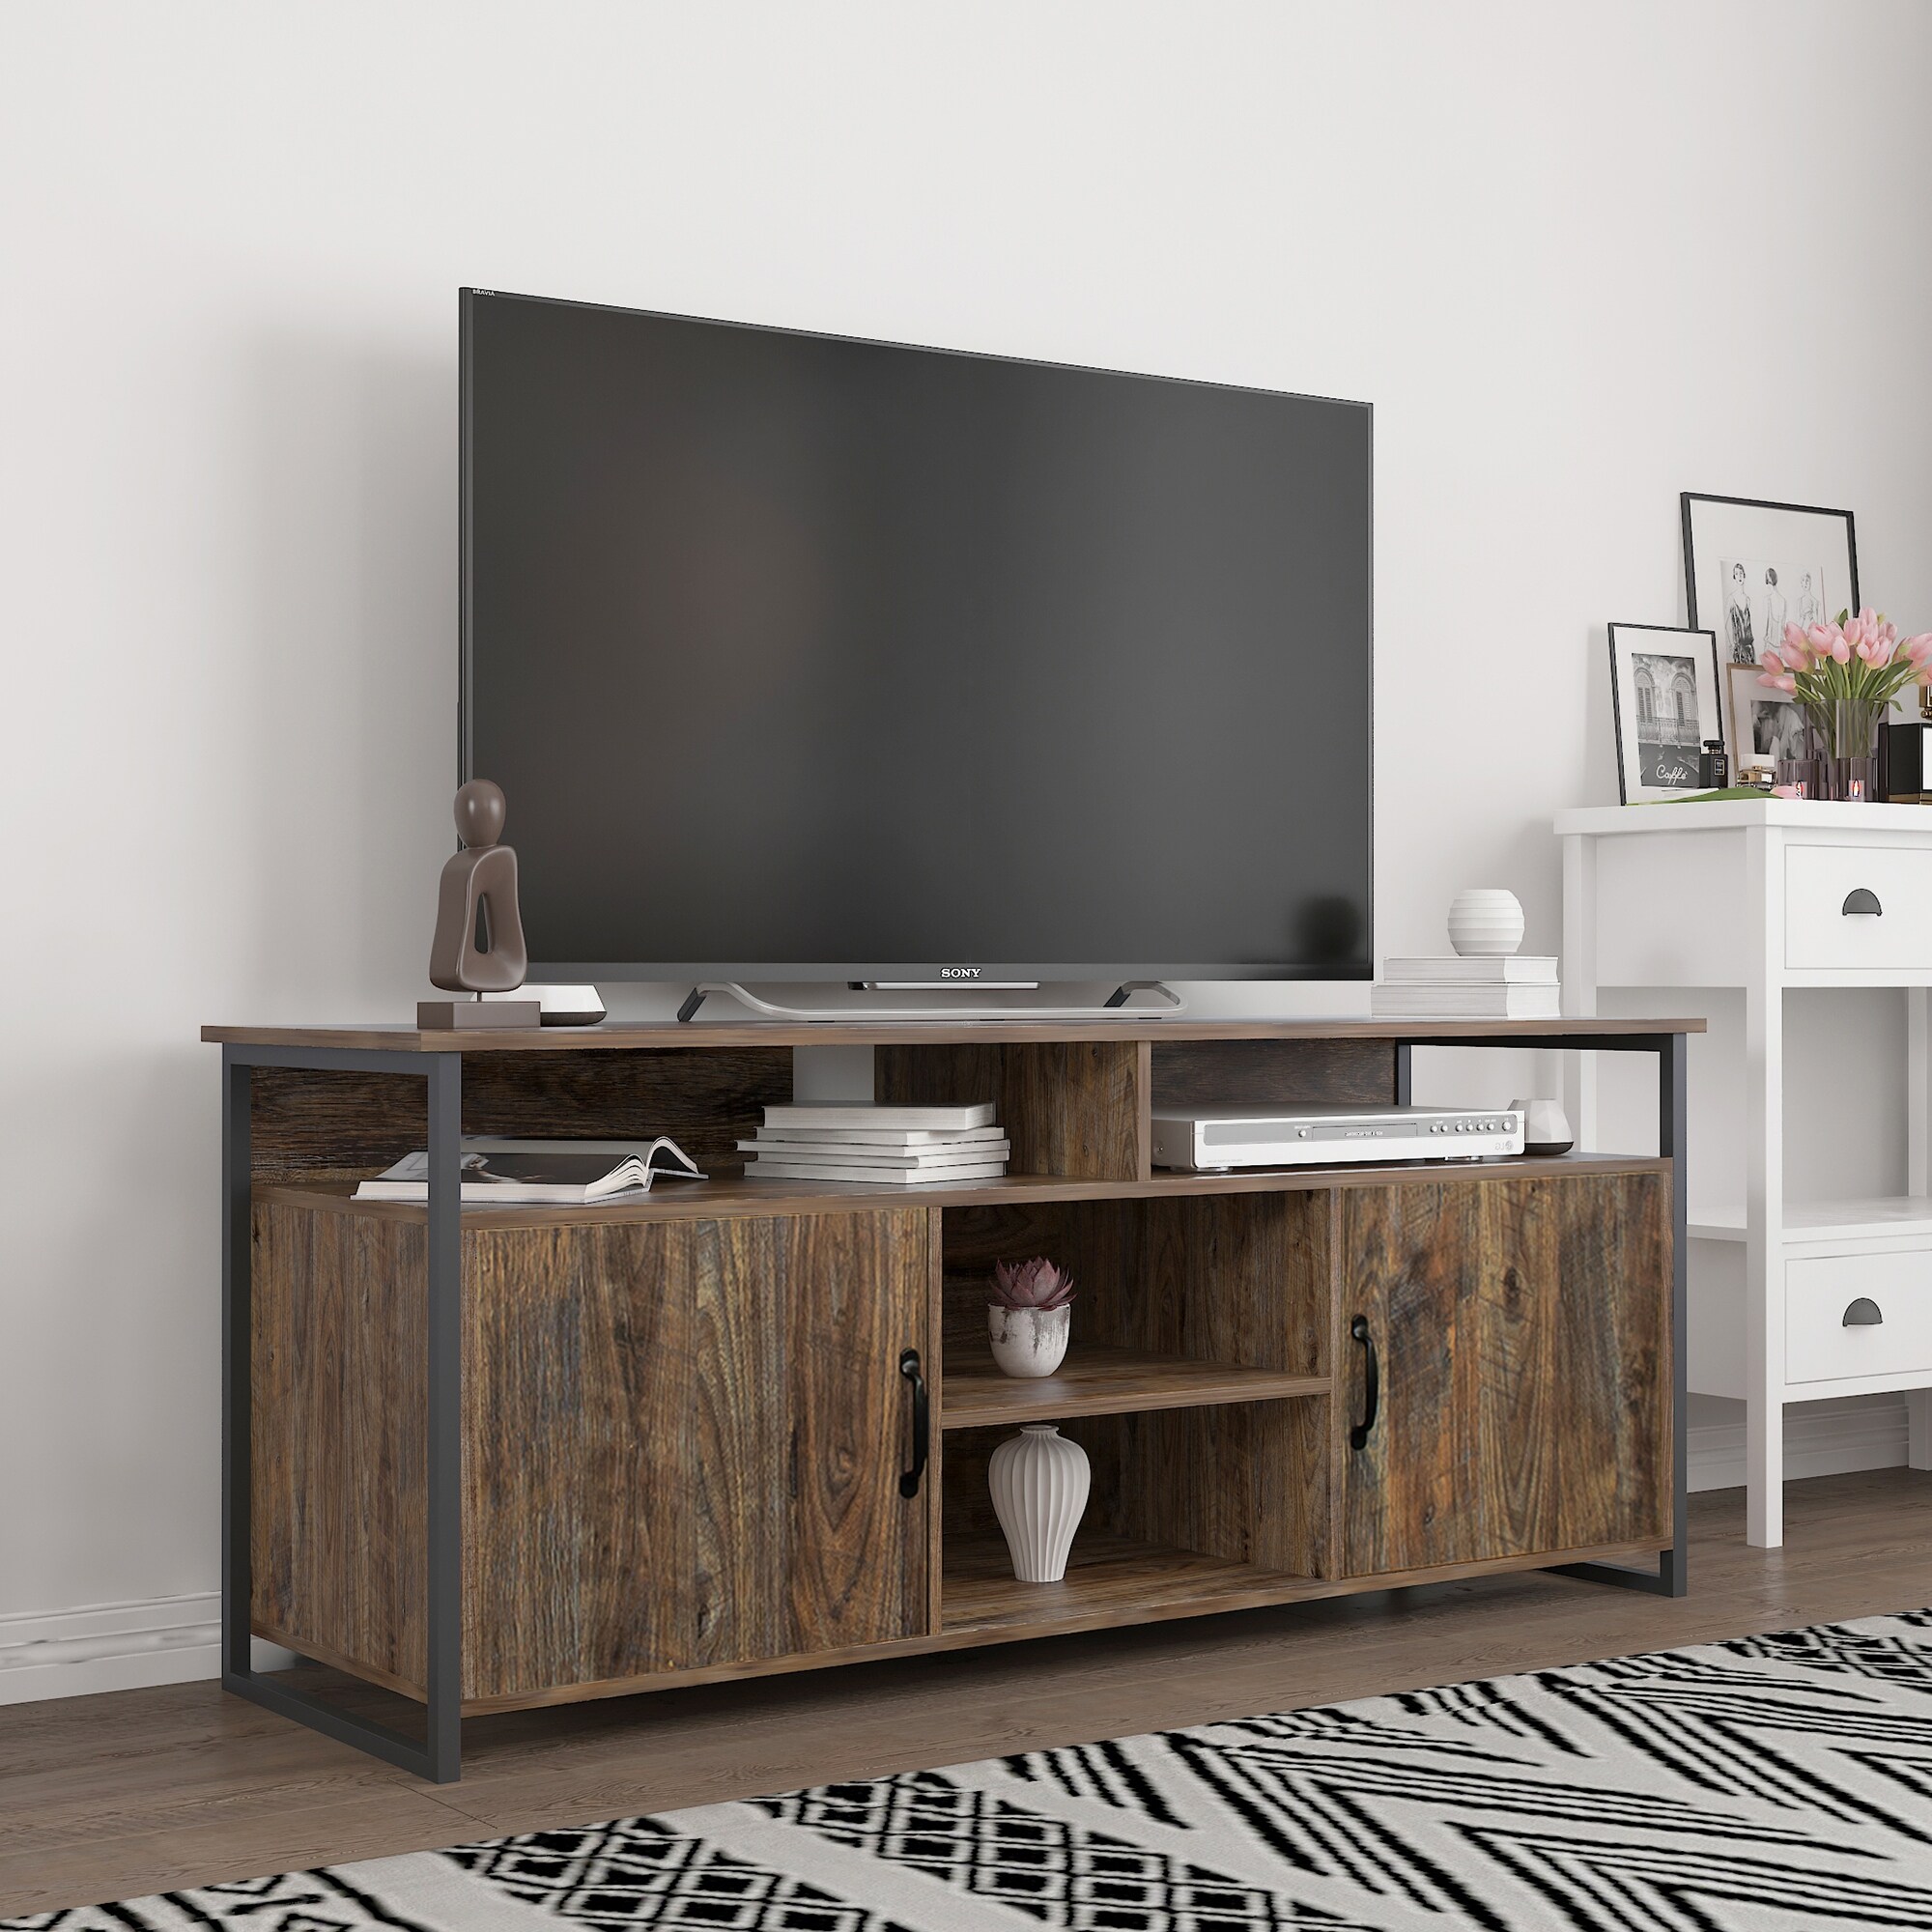 https://ak1.ostkcdn.com/images/products/is/images/direct/1a99b31ddc28505e06bcfa7ed84db33b3eaaaf3e/TV-Console-3-open-shelves-%26-2-cabinets-Entertainment-Center.jpg